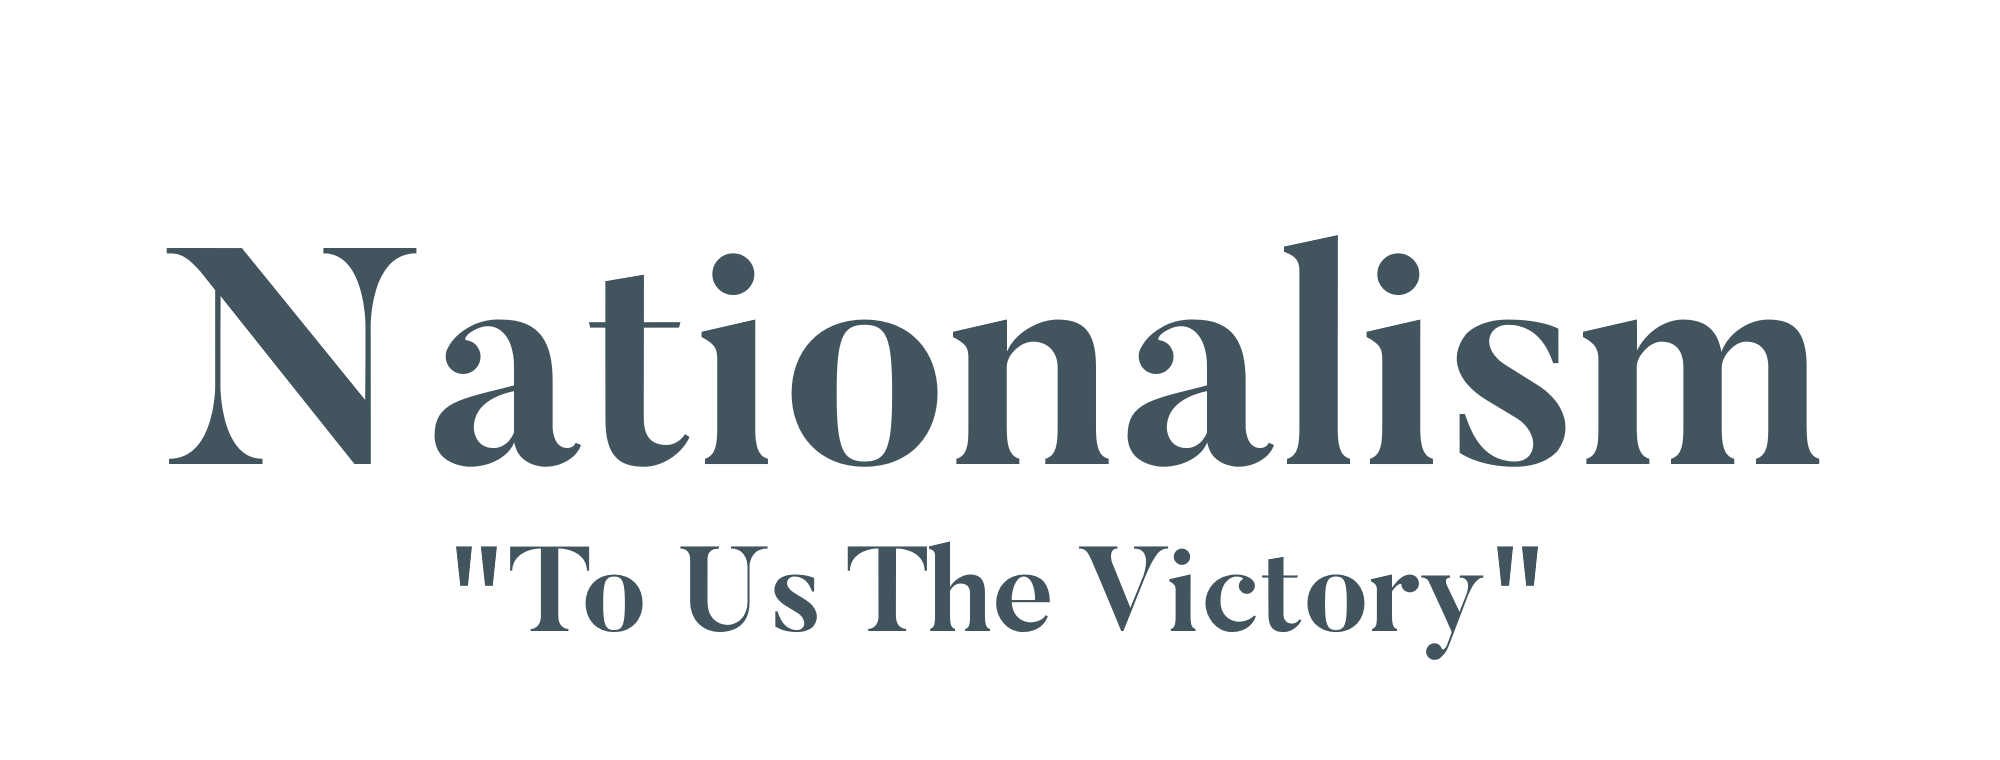 Link to Nationalism.co.uk. Text reads Nationalism To Us The Victory